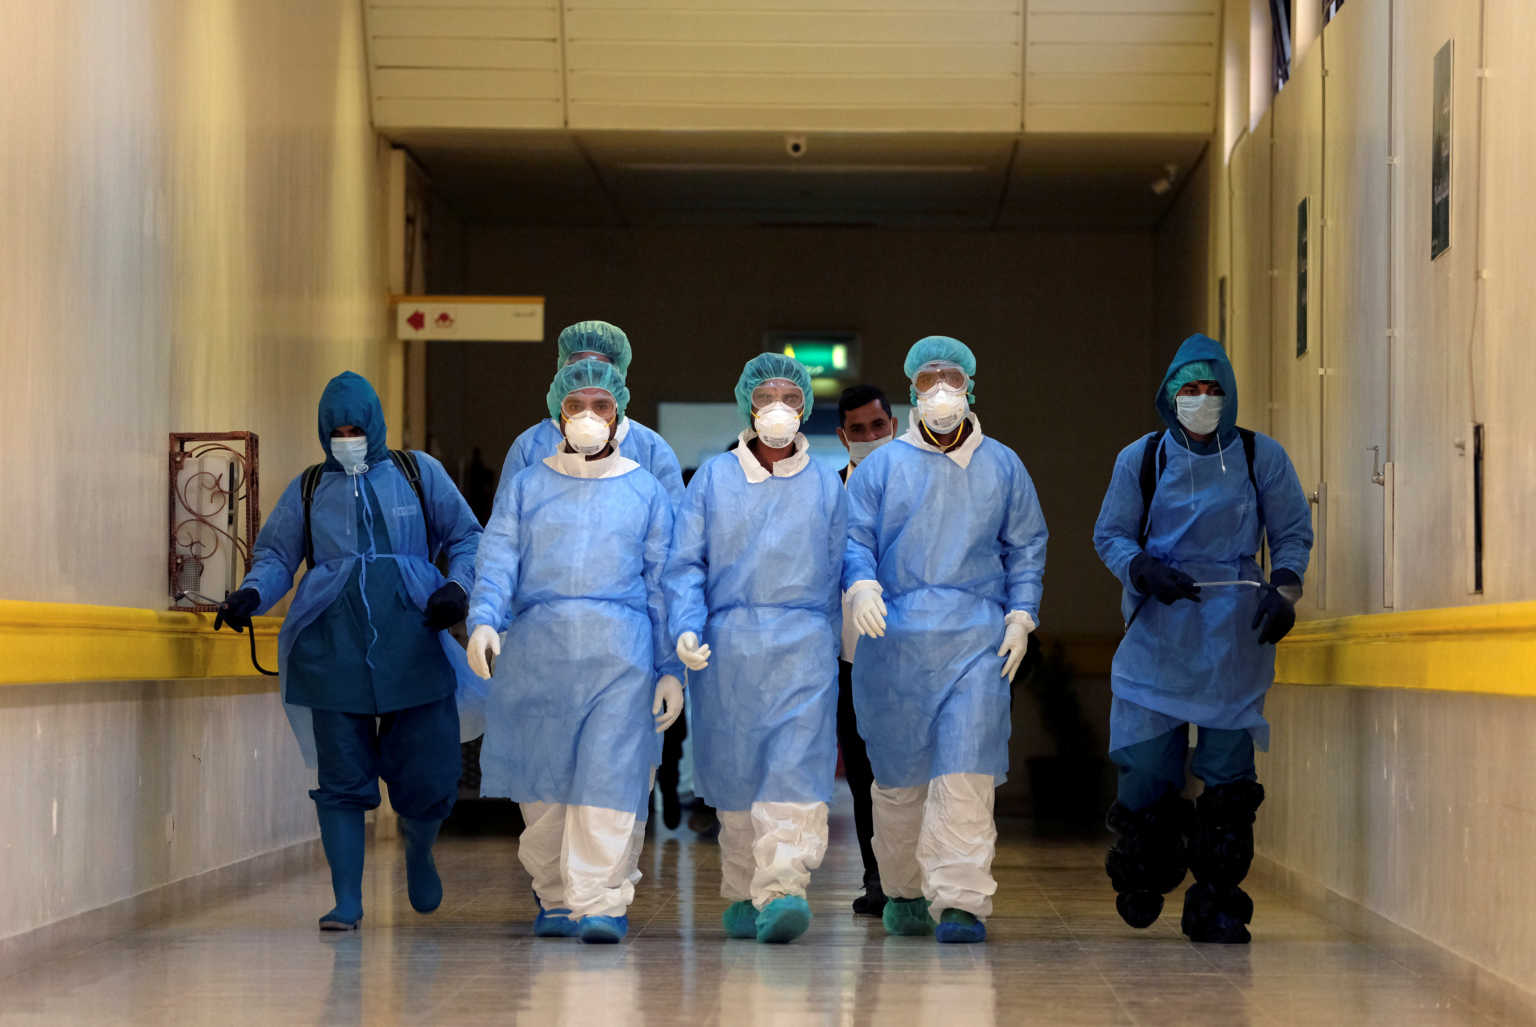 FILE PHOTO: Employees from a disinfection service company wearing protective face masks and gloves sanitise the corridors of Benghazi Medical Center following the outbreak of the coronavirus disease (COVID-19), in Benghazi, Libya April 14, 2020. REUTERS/Esam Omran Al-Fetori/File Photo